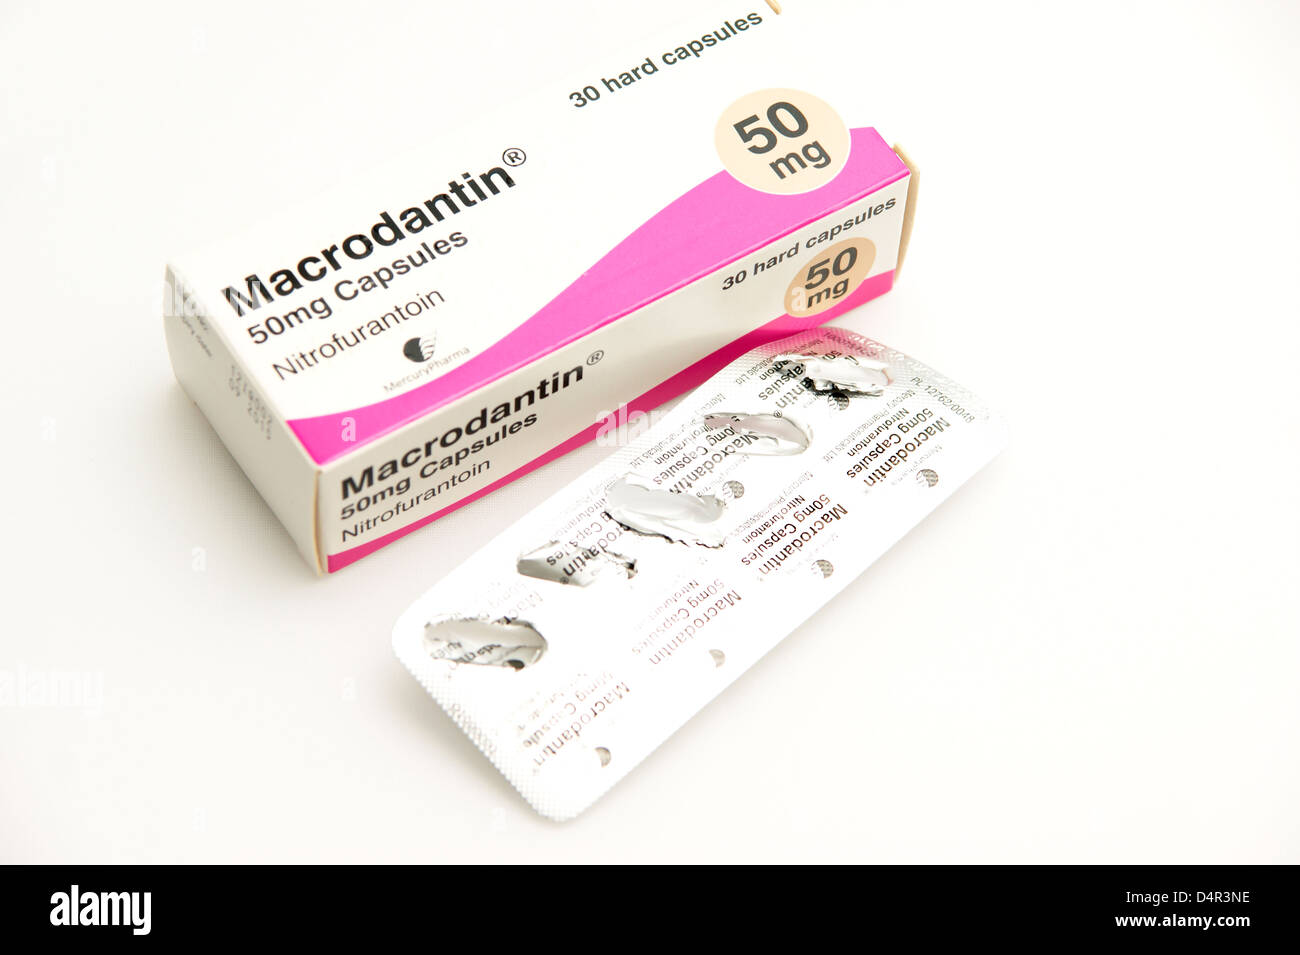 Macrodantin Tablet Uses Benefits and Symptoms Side Effects